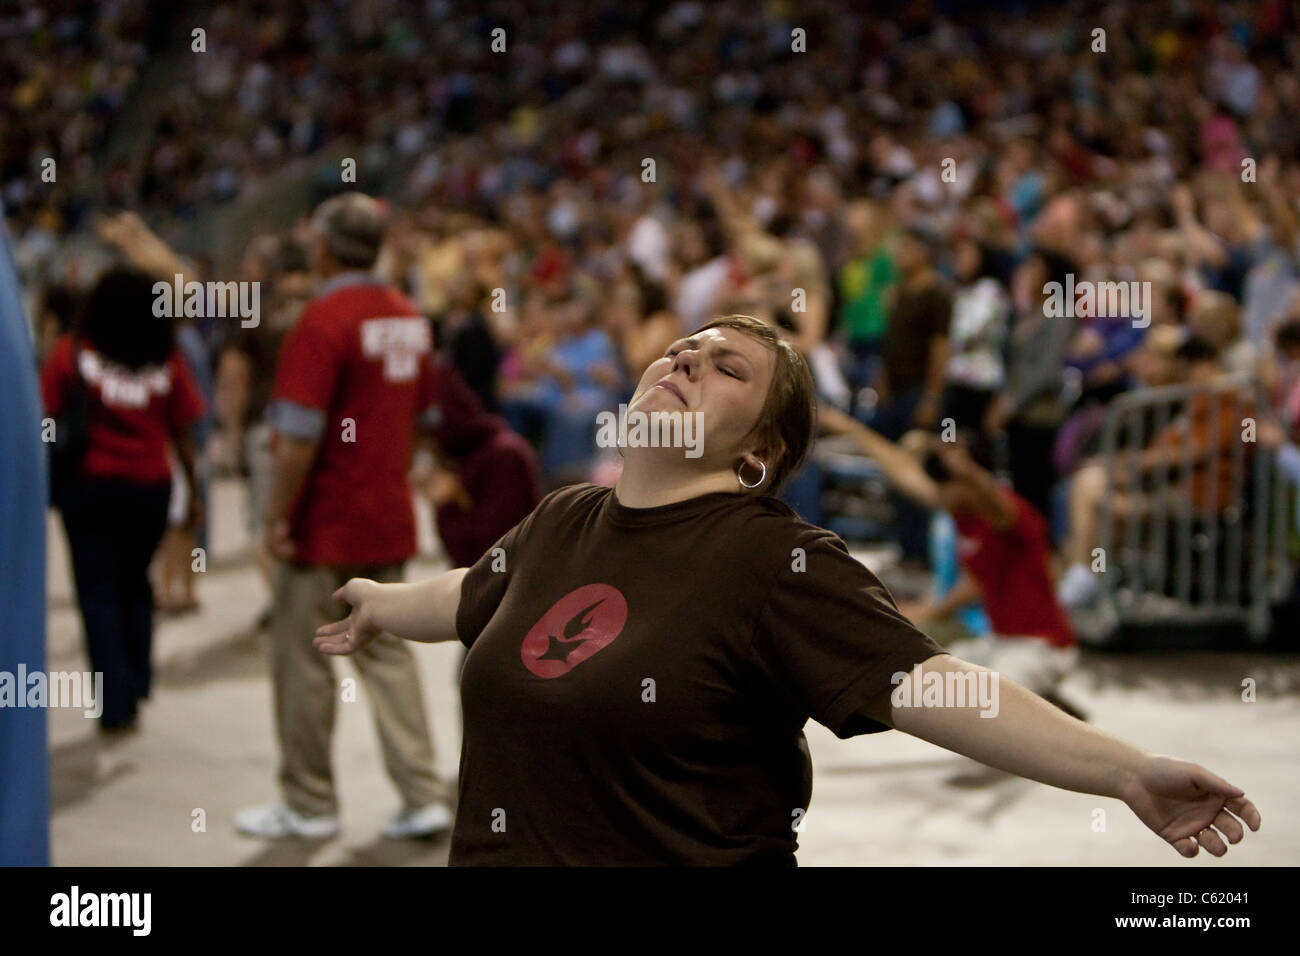 White woman hold out arms in prayer during day long Christian event at stadium in Houston, Texas Stock Photo